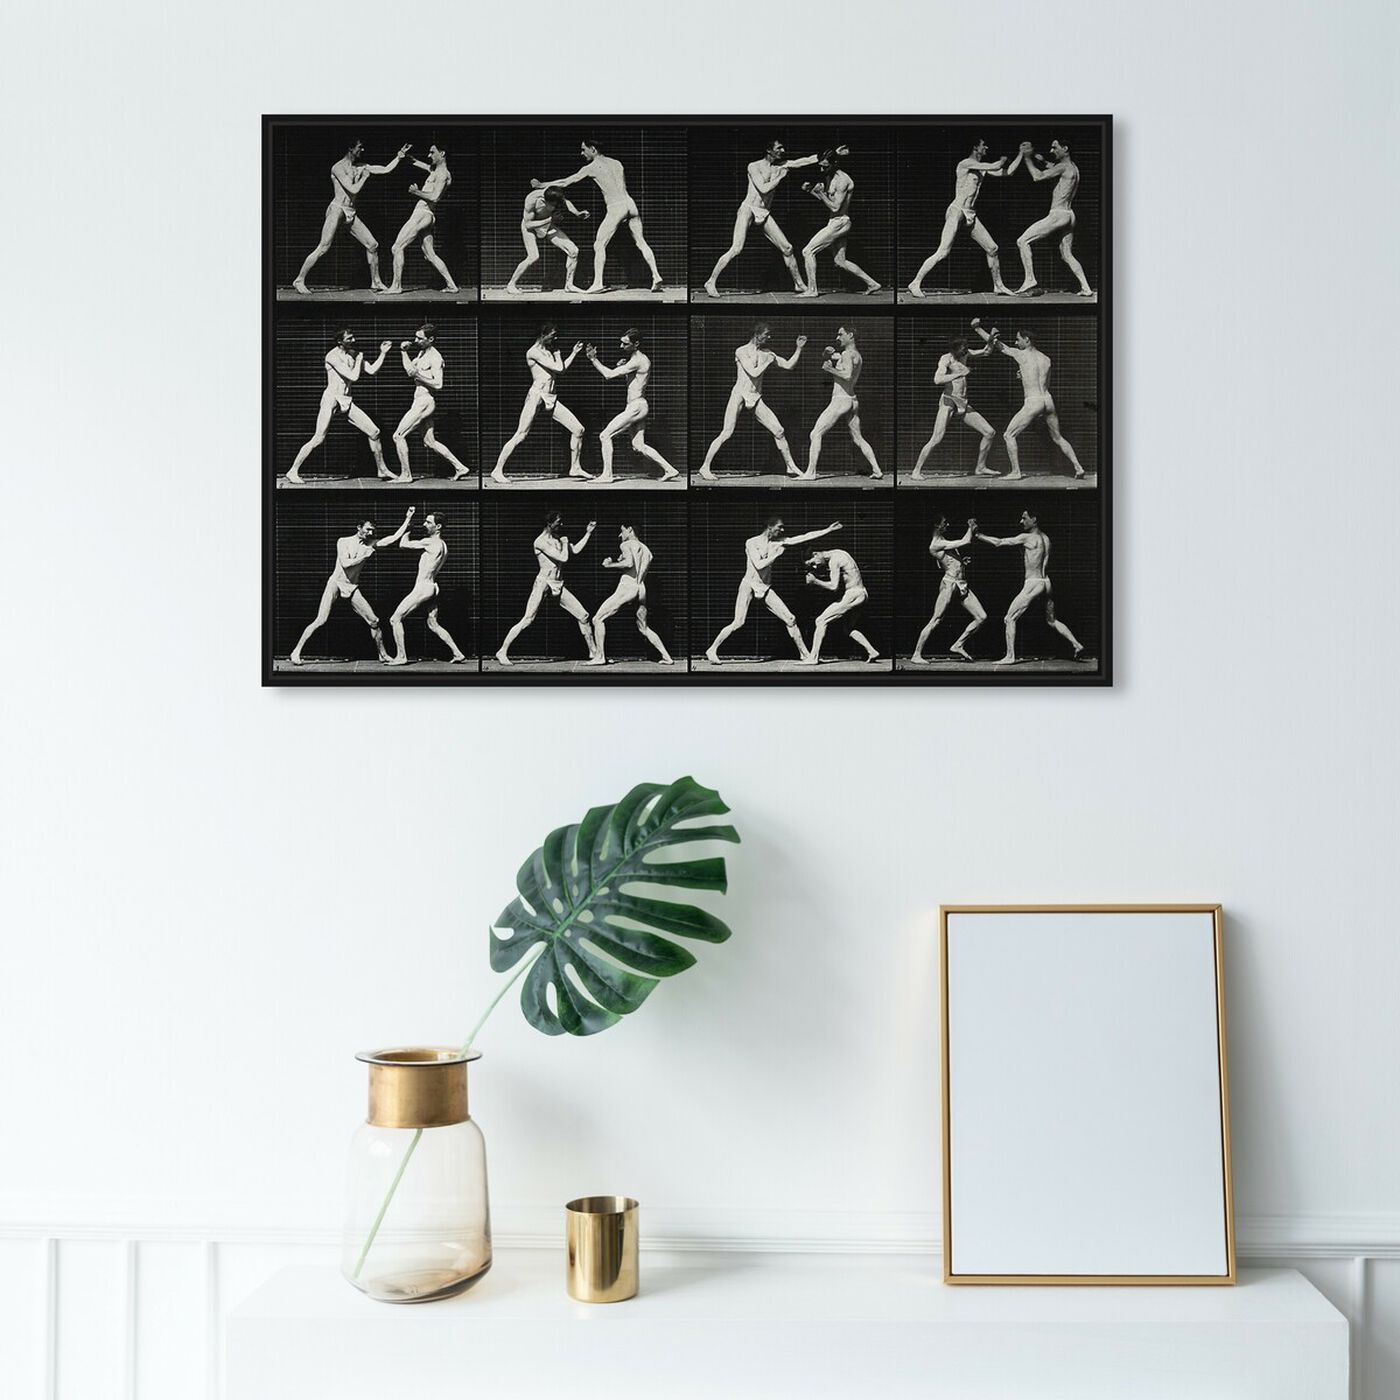 Hanging view of Muybridge's Boxers featuring sports and teams and boxing art.